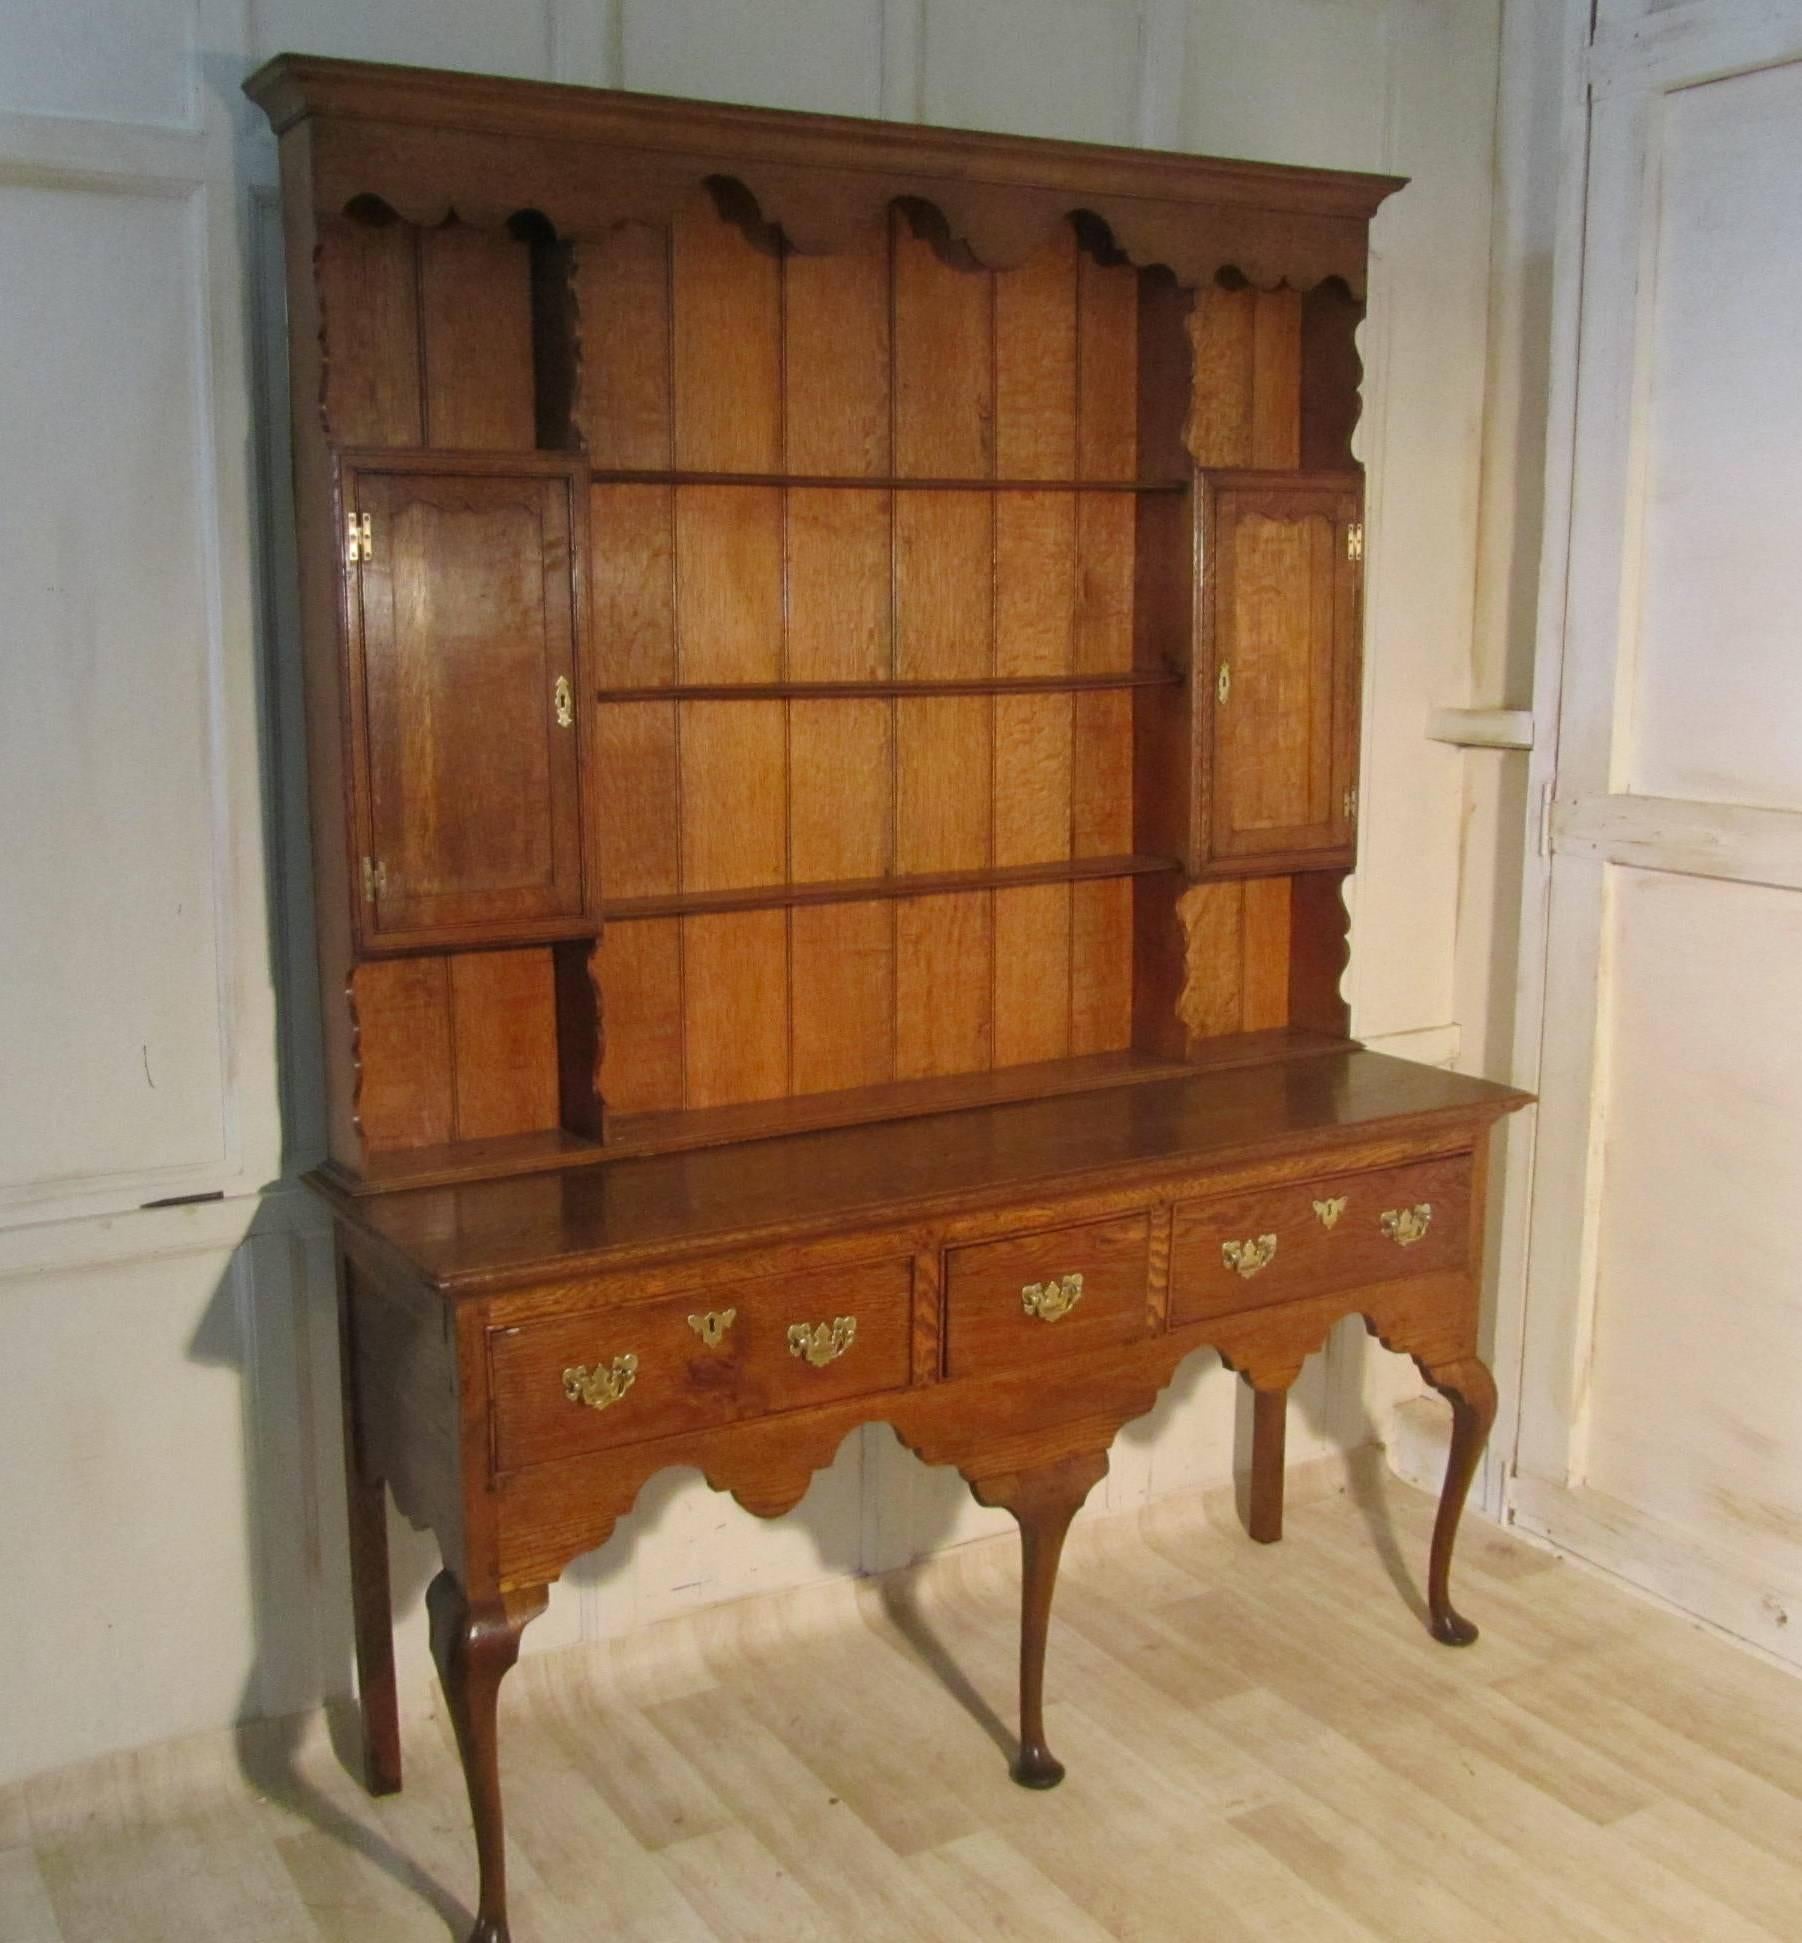 An exceptional Georgian country oak dresser 

A superb piece of period oak, with hand cut mouldings and back boards
The base of the dresser has three drawers with a scalloped frieze below and it stands on elegant pad feet
The upper part of the